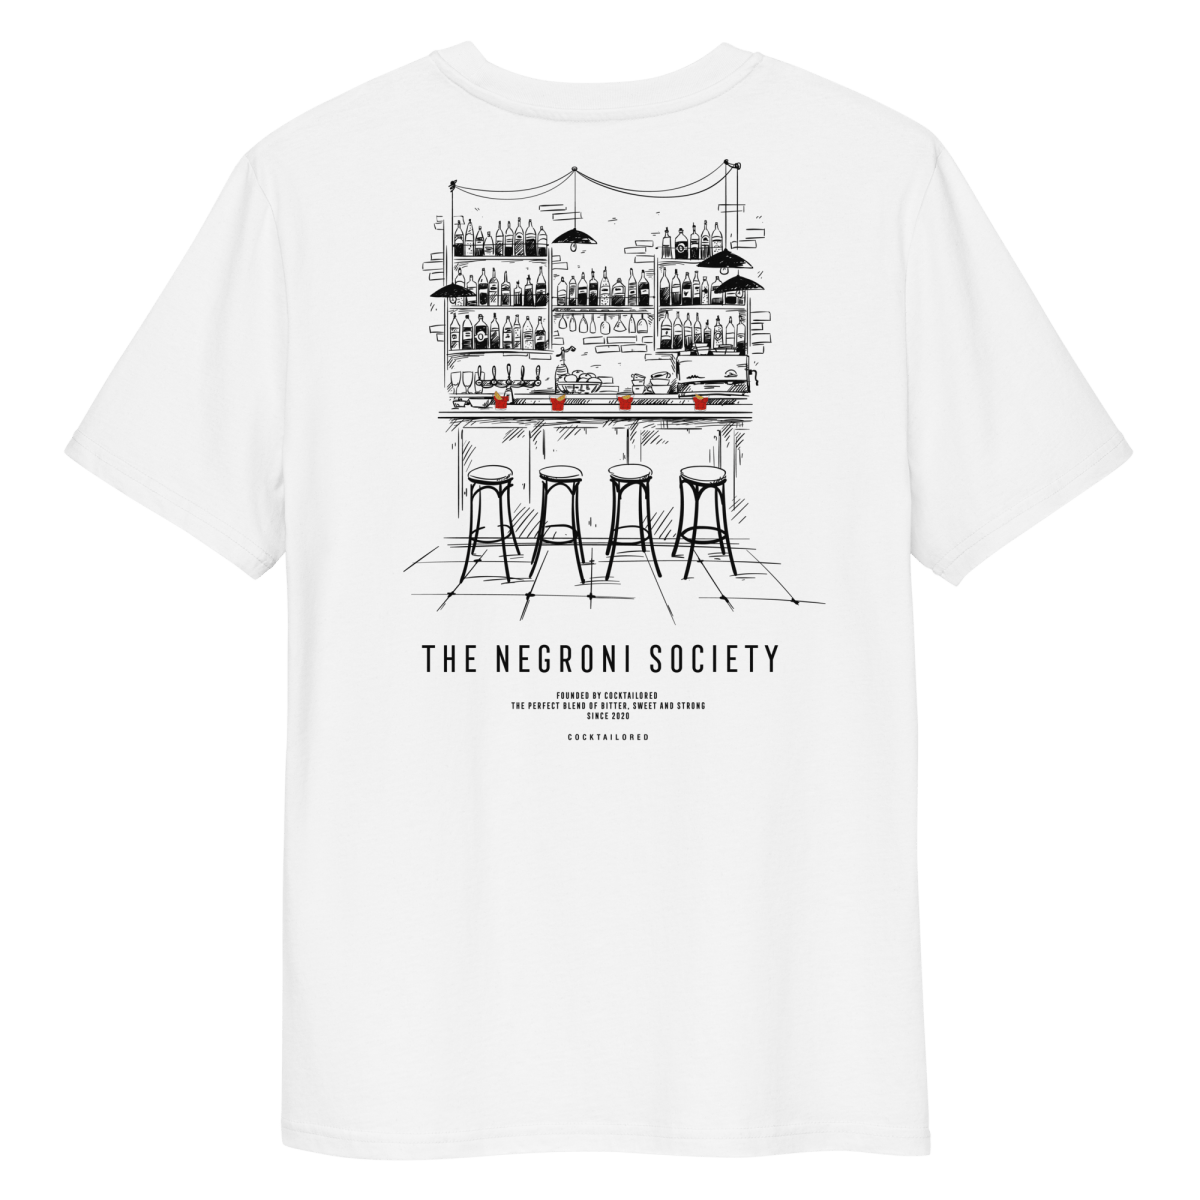 The Negroni Society "The Bar" biologisch t-shirt